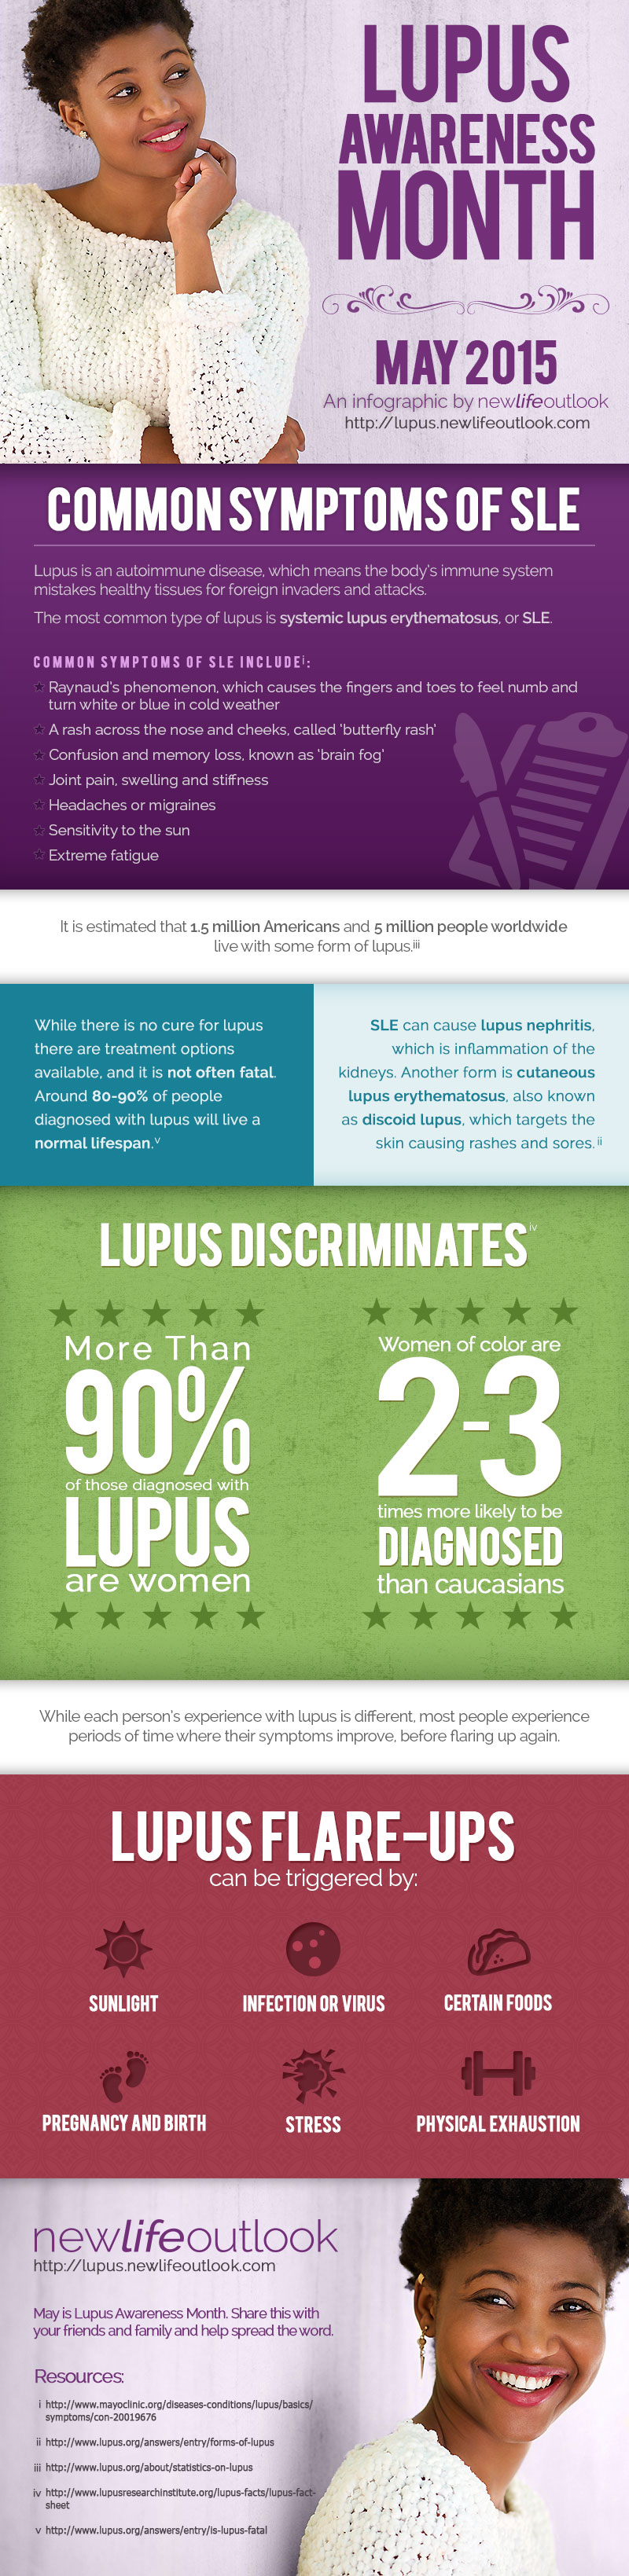 Lupus Awareness Month 2015: New Life Outlook Lupus Infographic